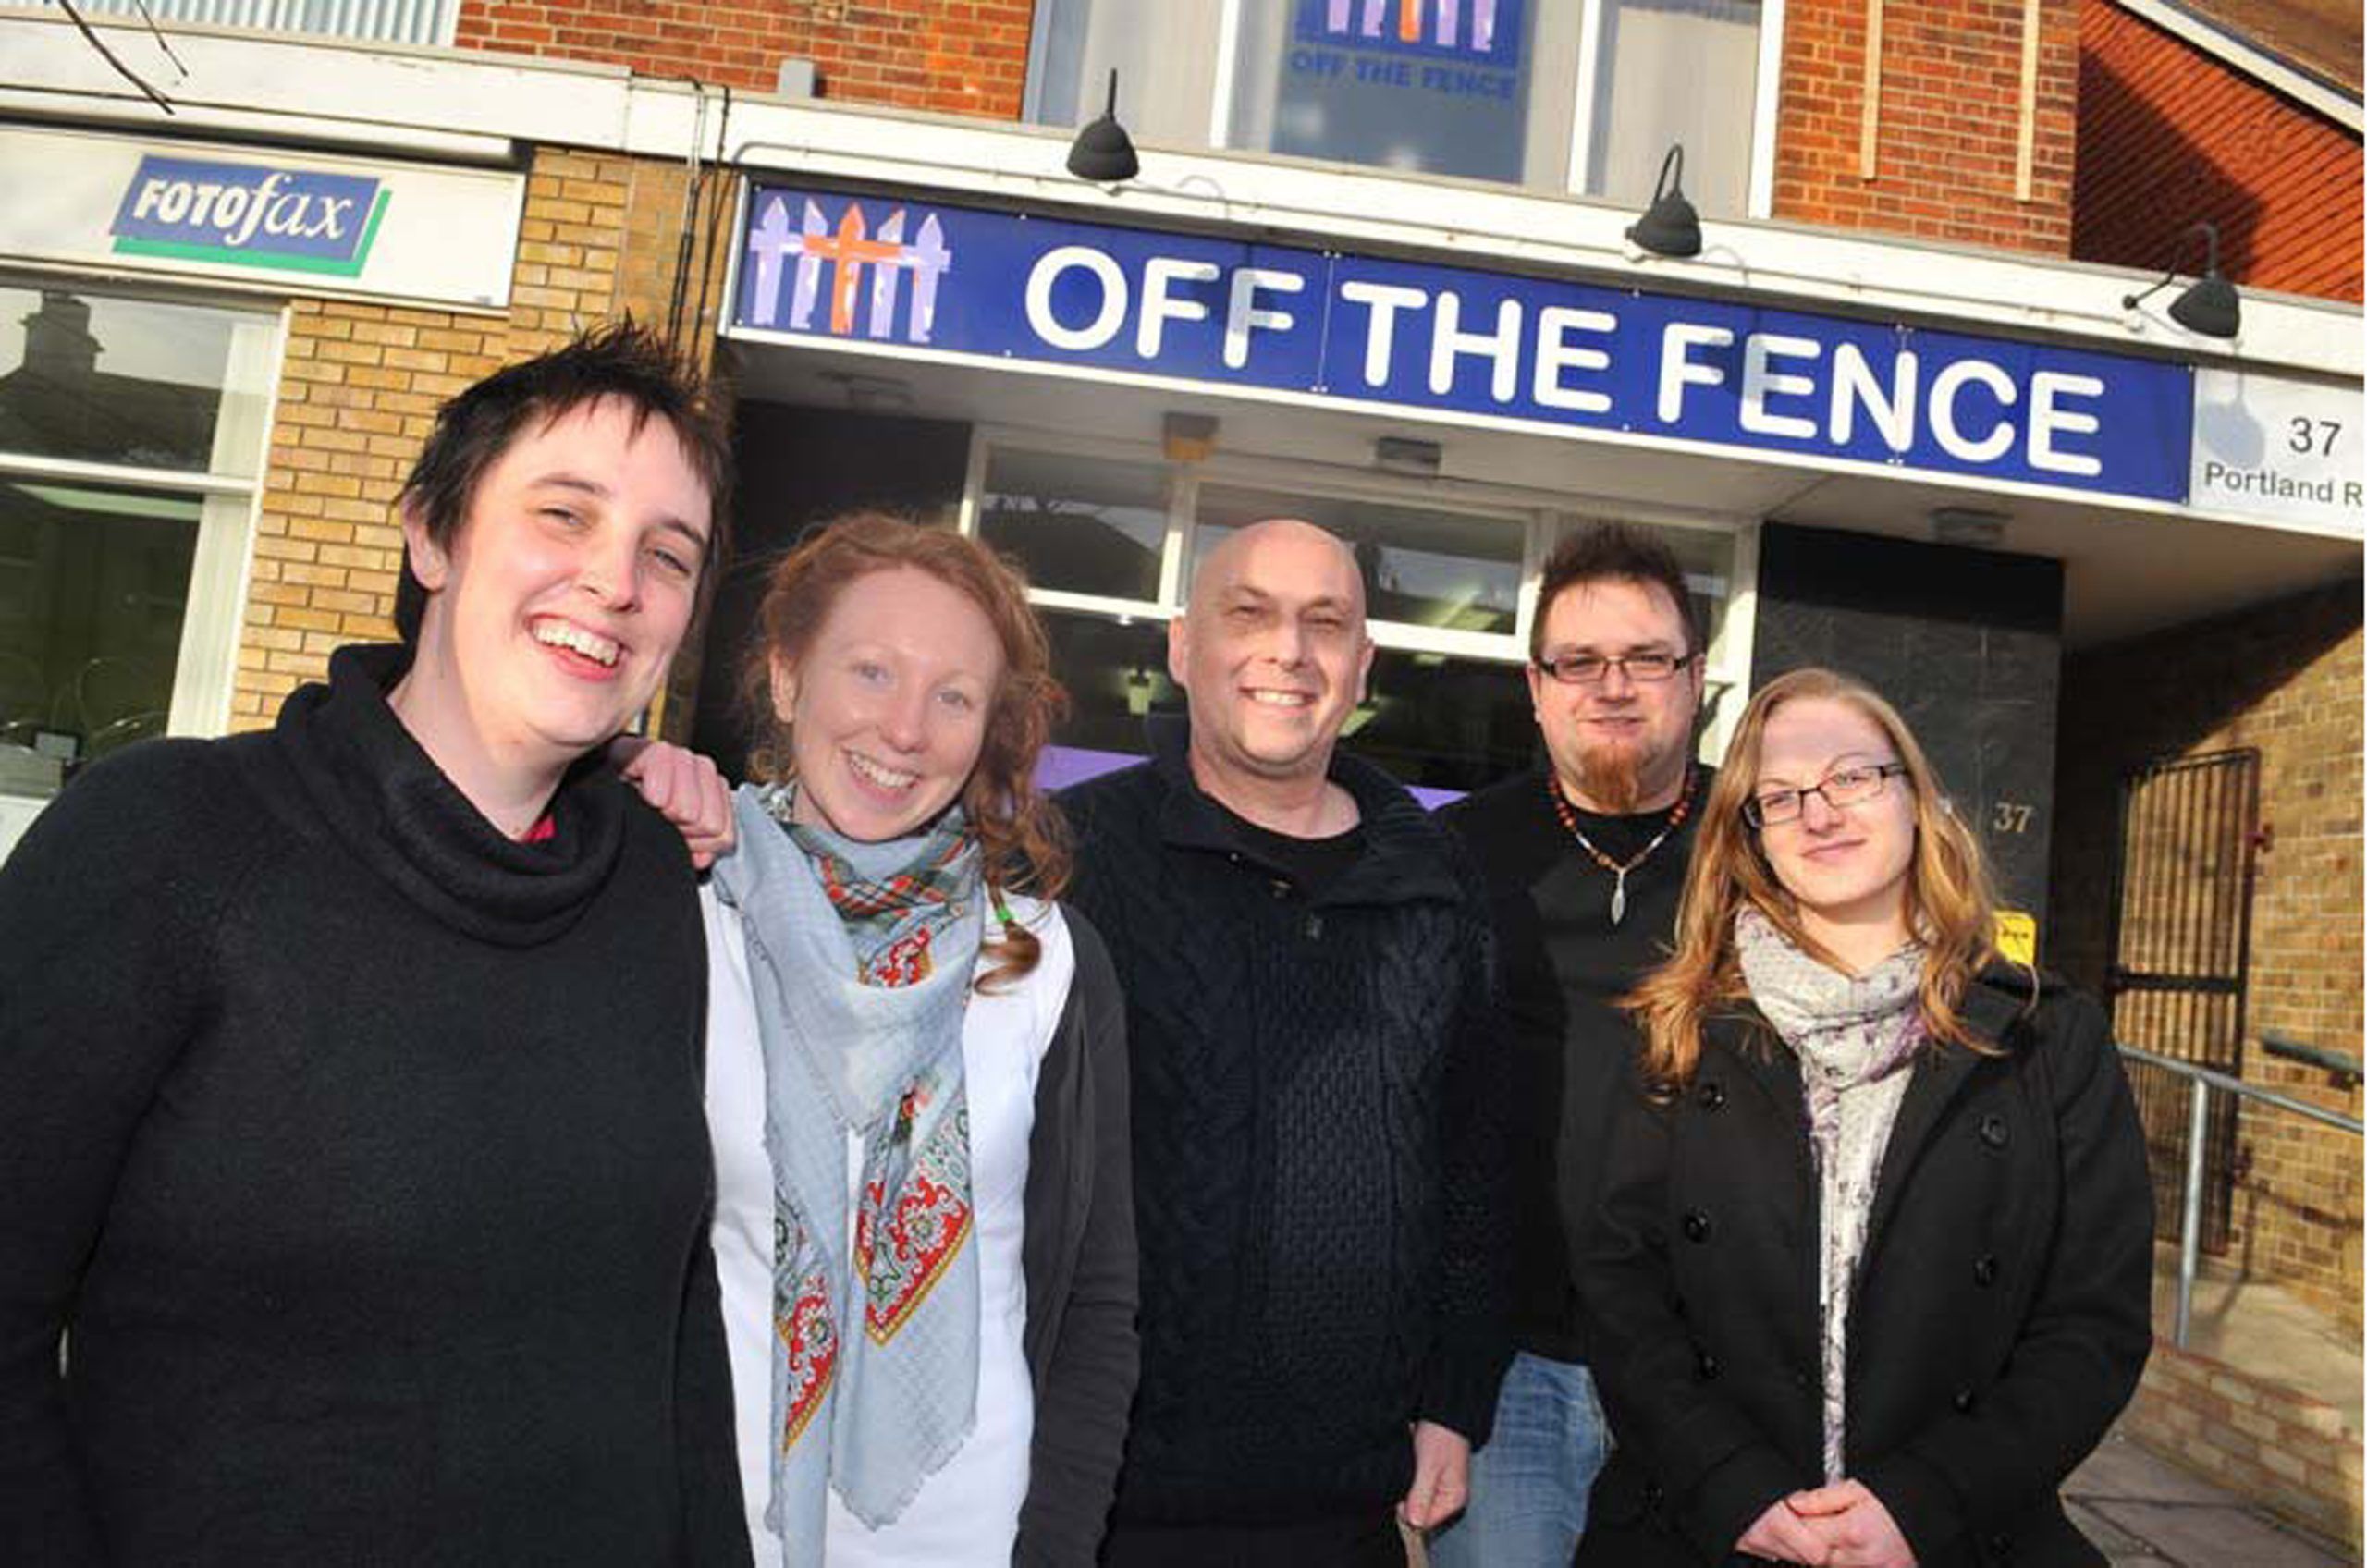 Brighton’s Off the Fence team is rejoicing at securing their centre for the homeless